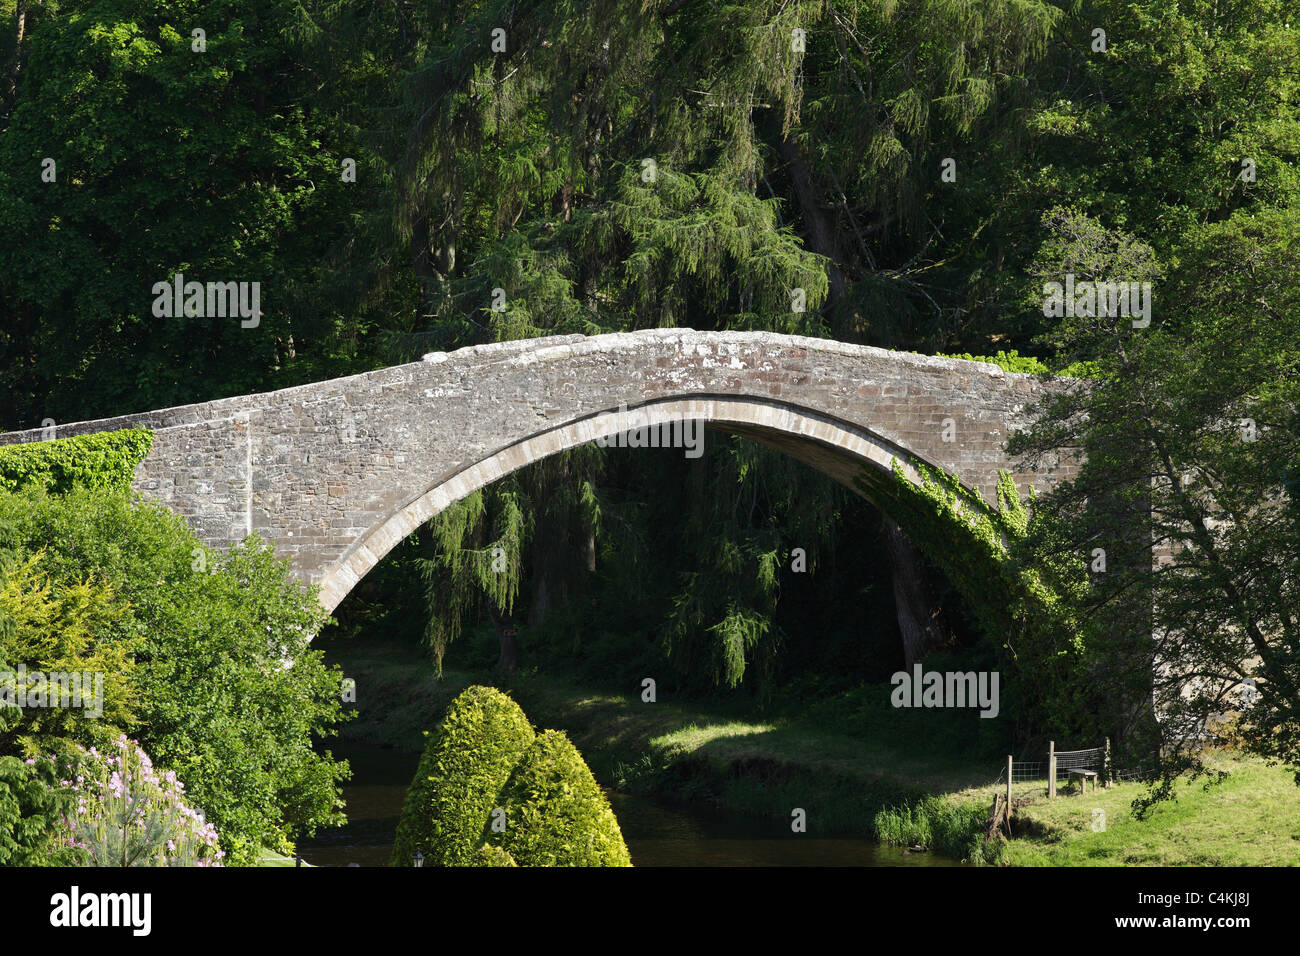 Brig O' Doon over the River Doon as featured in Tam O' Shanter by Robert Burns, Alloway, Ayrshire, Scotland, UK Stock Photo